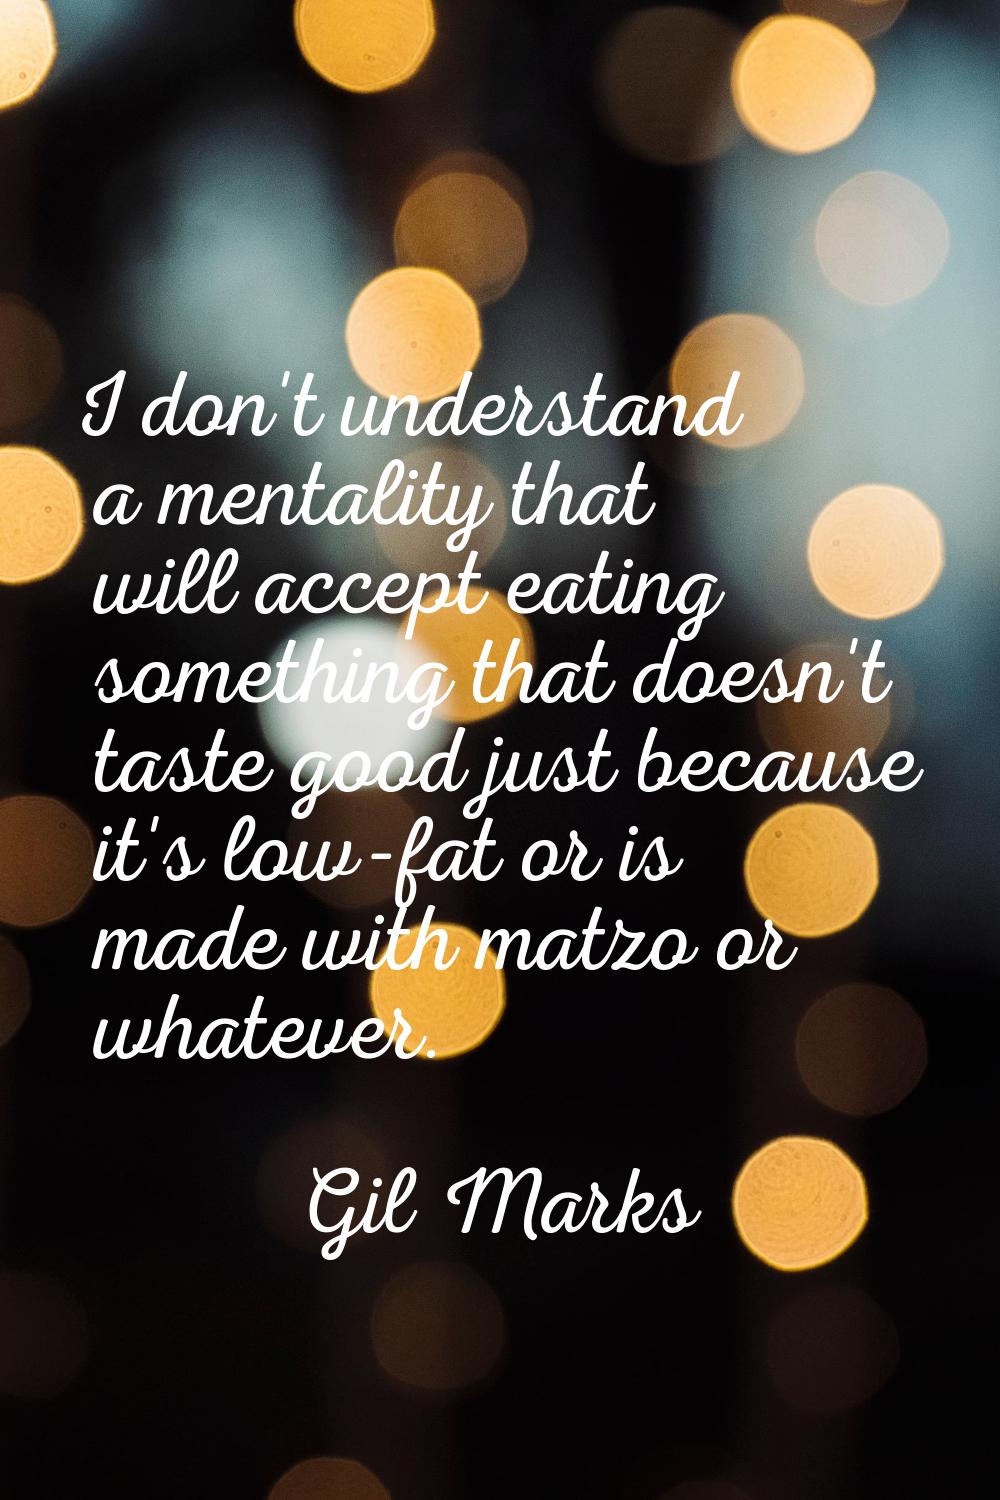 I don't understand a mentality that will accept eating something that doesn't taste good just becau